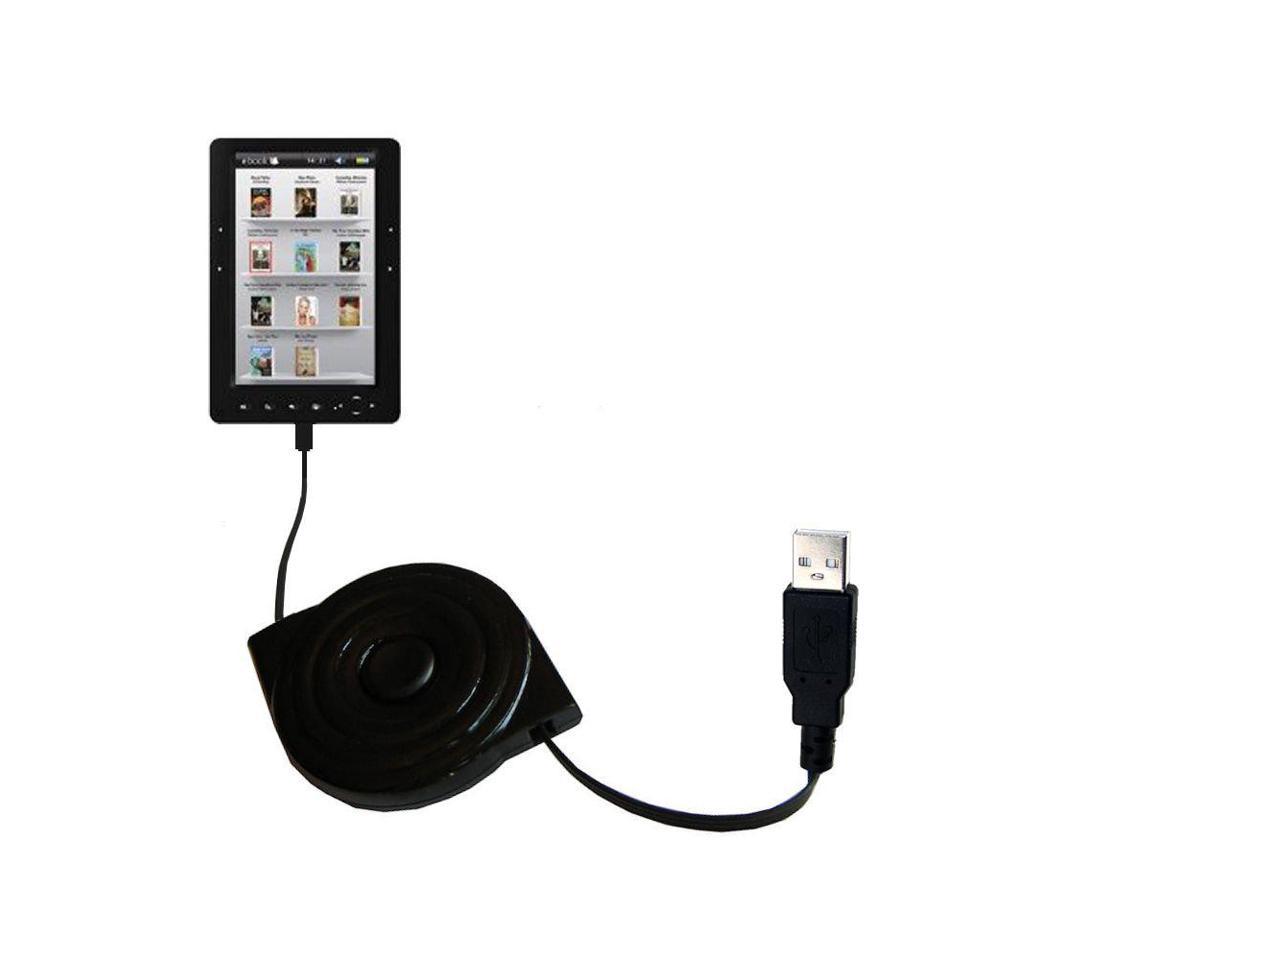 USB Power Port Ready design and uses TipExchange Gomadic compact and retractable USB Charge cable for Elonex 705EB Colour eBook Reader